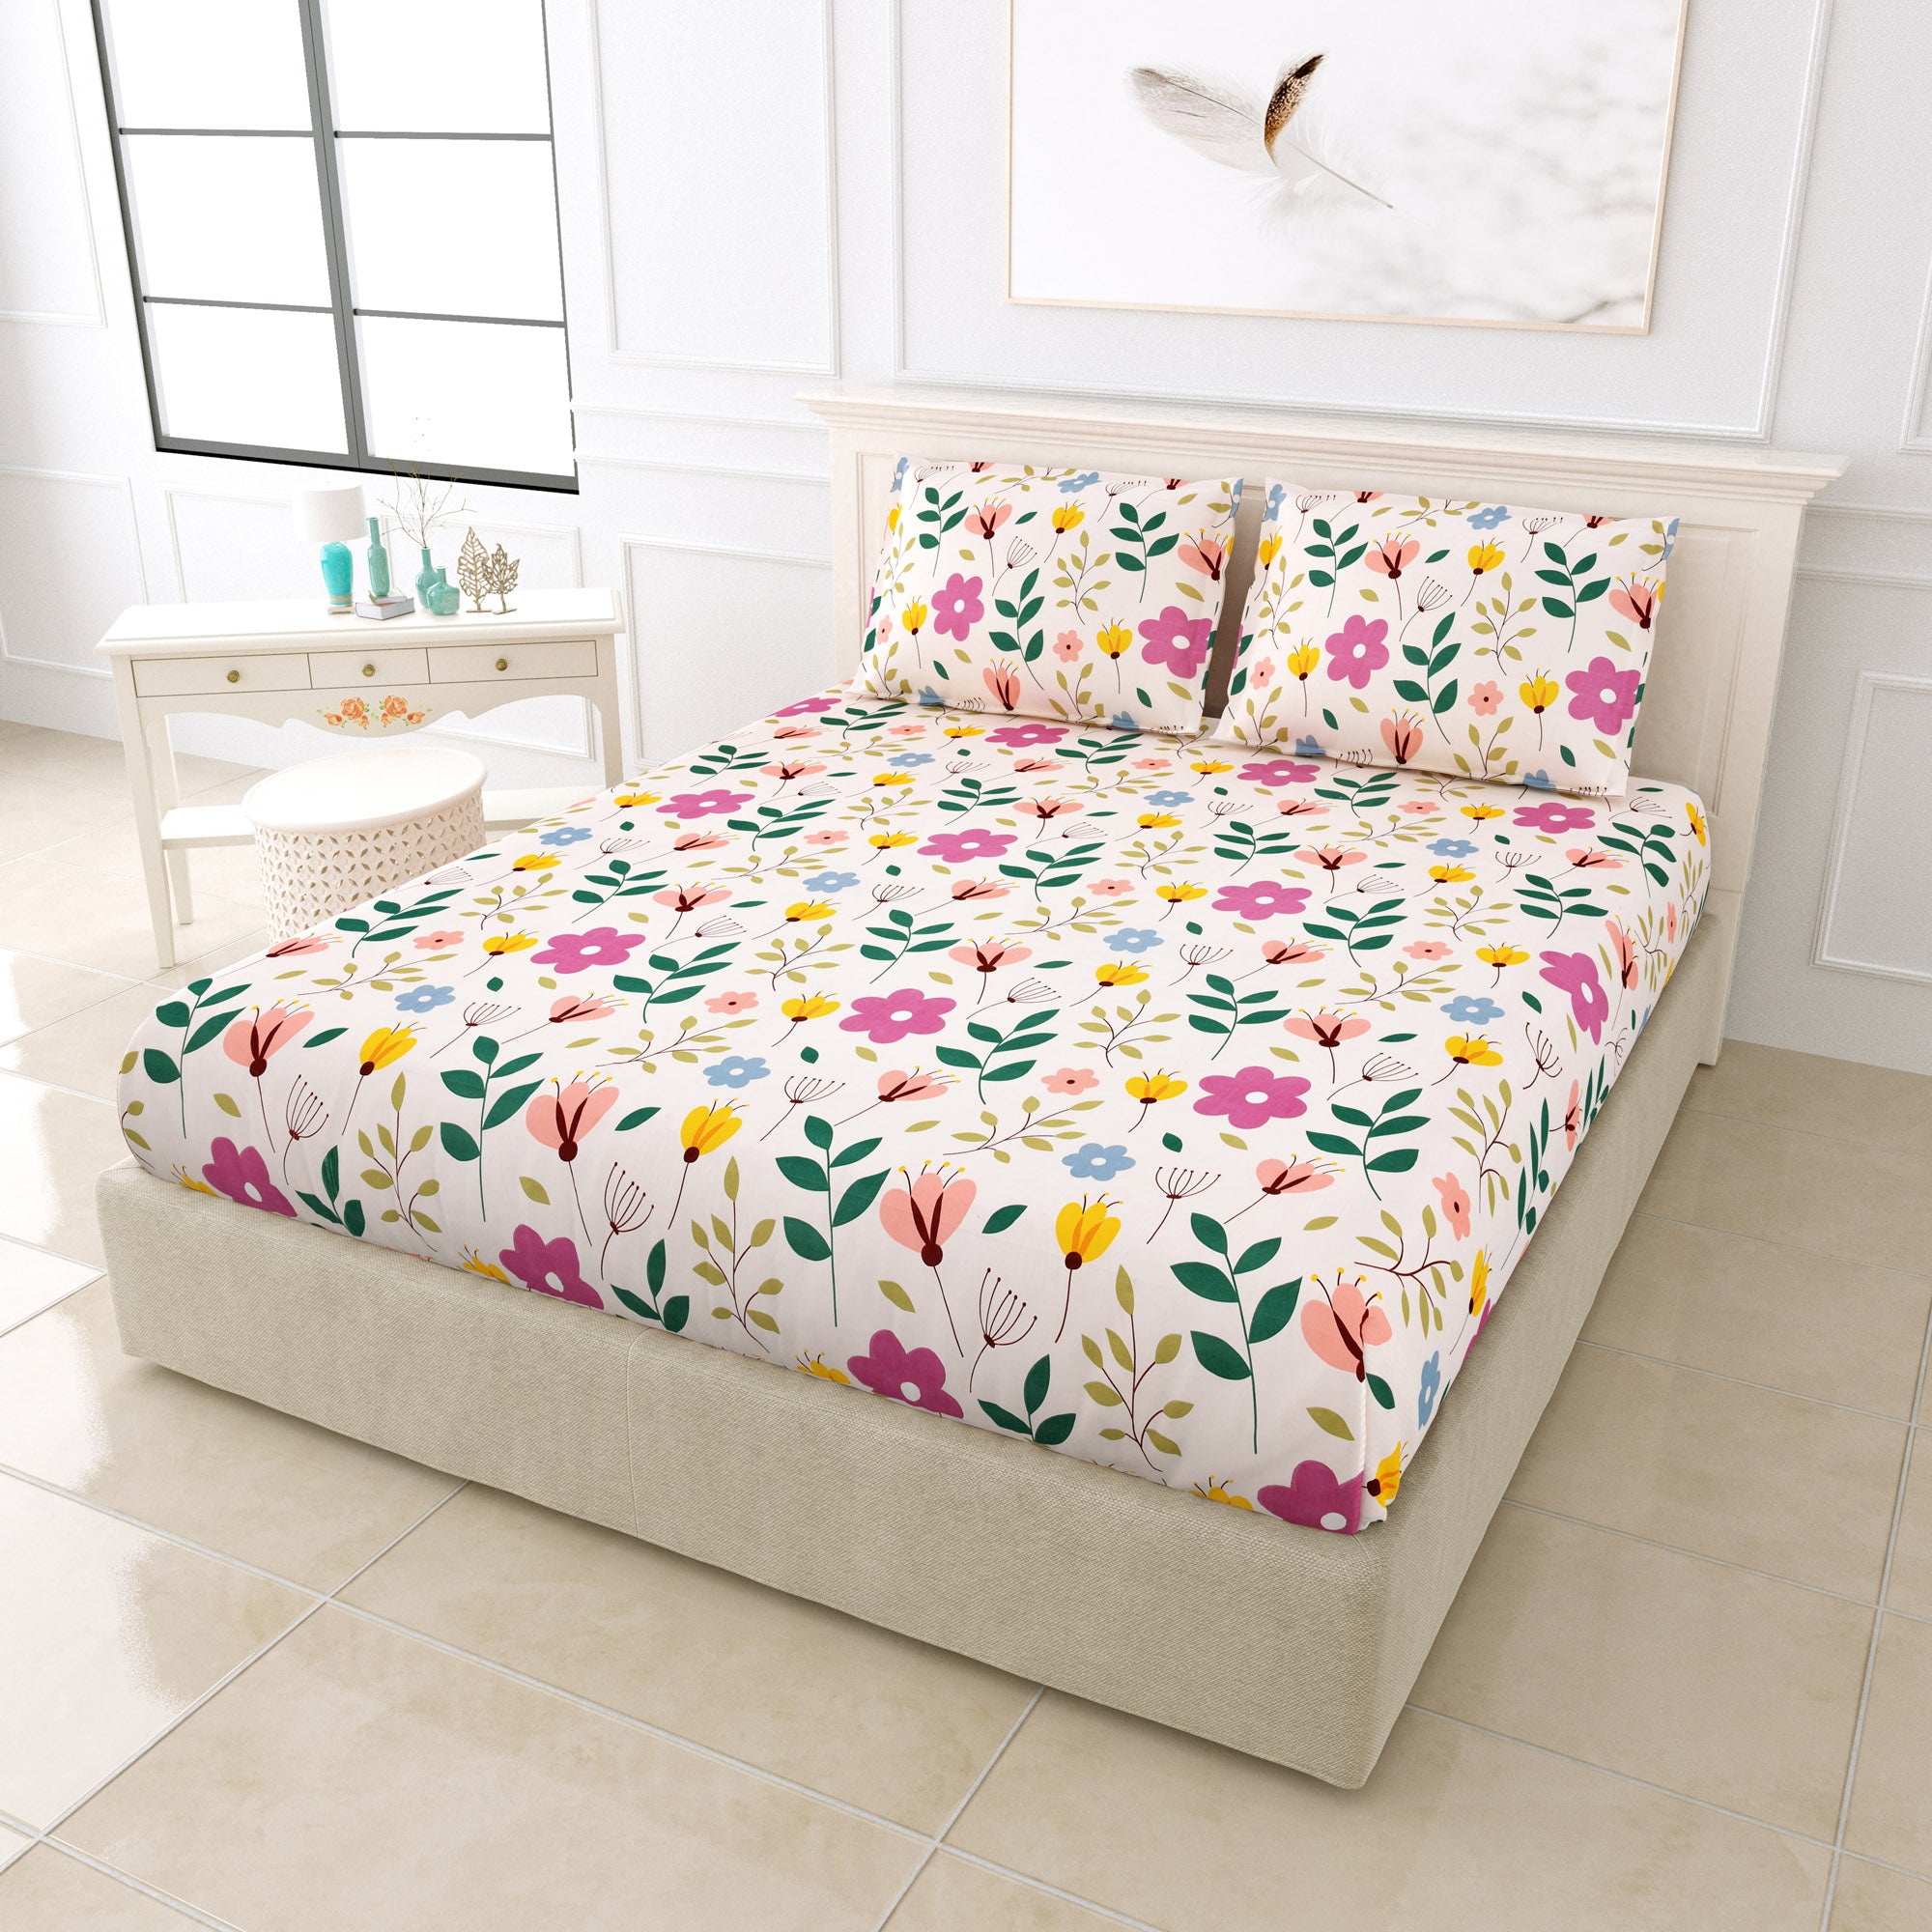 eCraftIndia 250 TC Multicolor Flowers Leaves Printed Cotton Double Bedsheet With 2 Pillow Covers 1